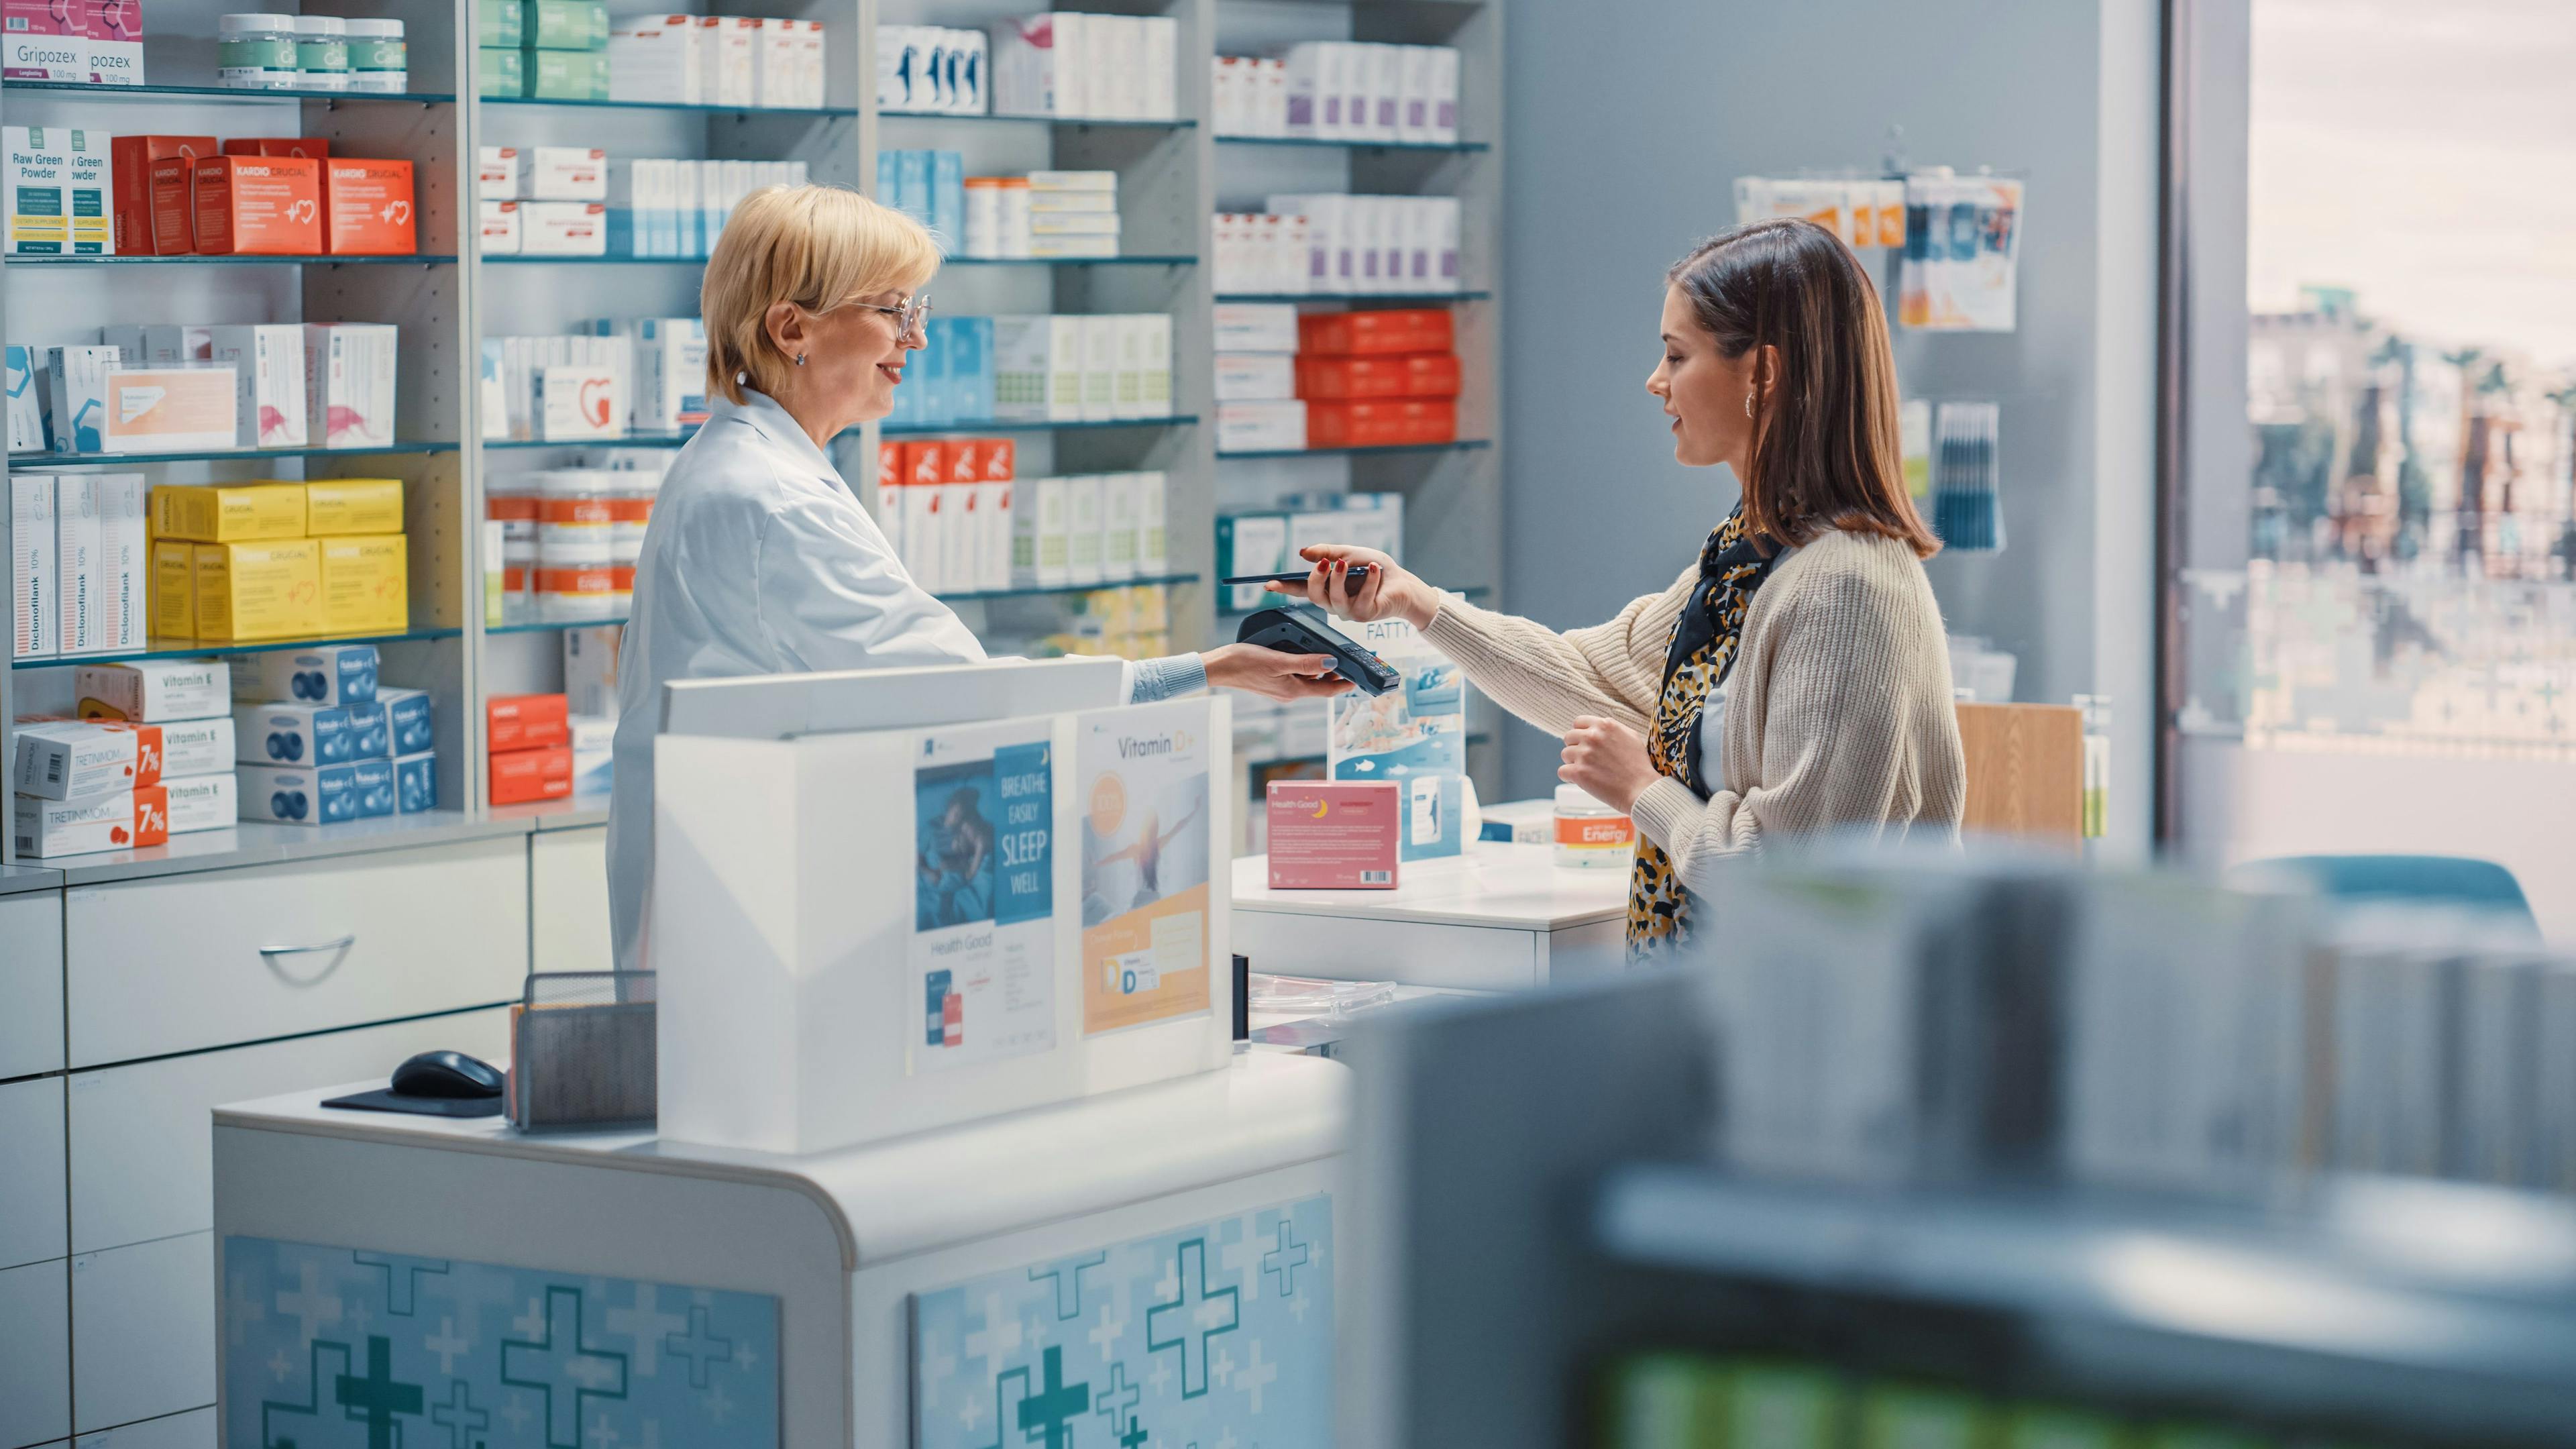 Female Pharmacist and Young Woman Using Contactless Payment | Image Credit: Gorodenkoff - stock.adobe.com